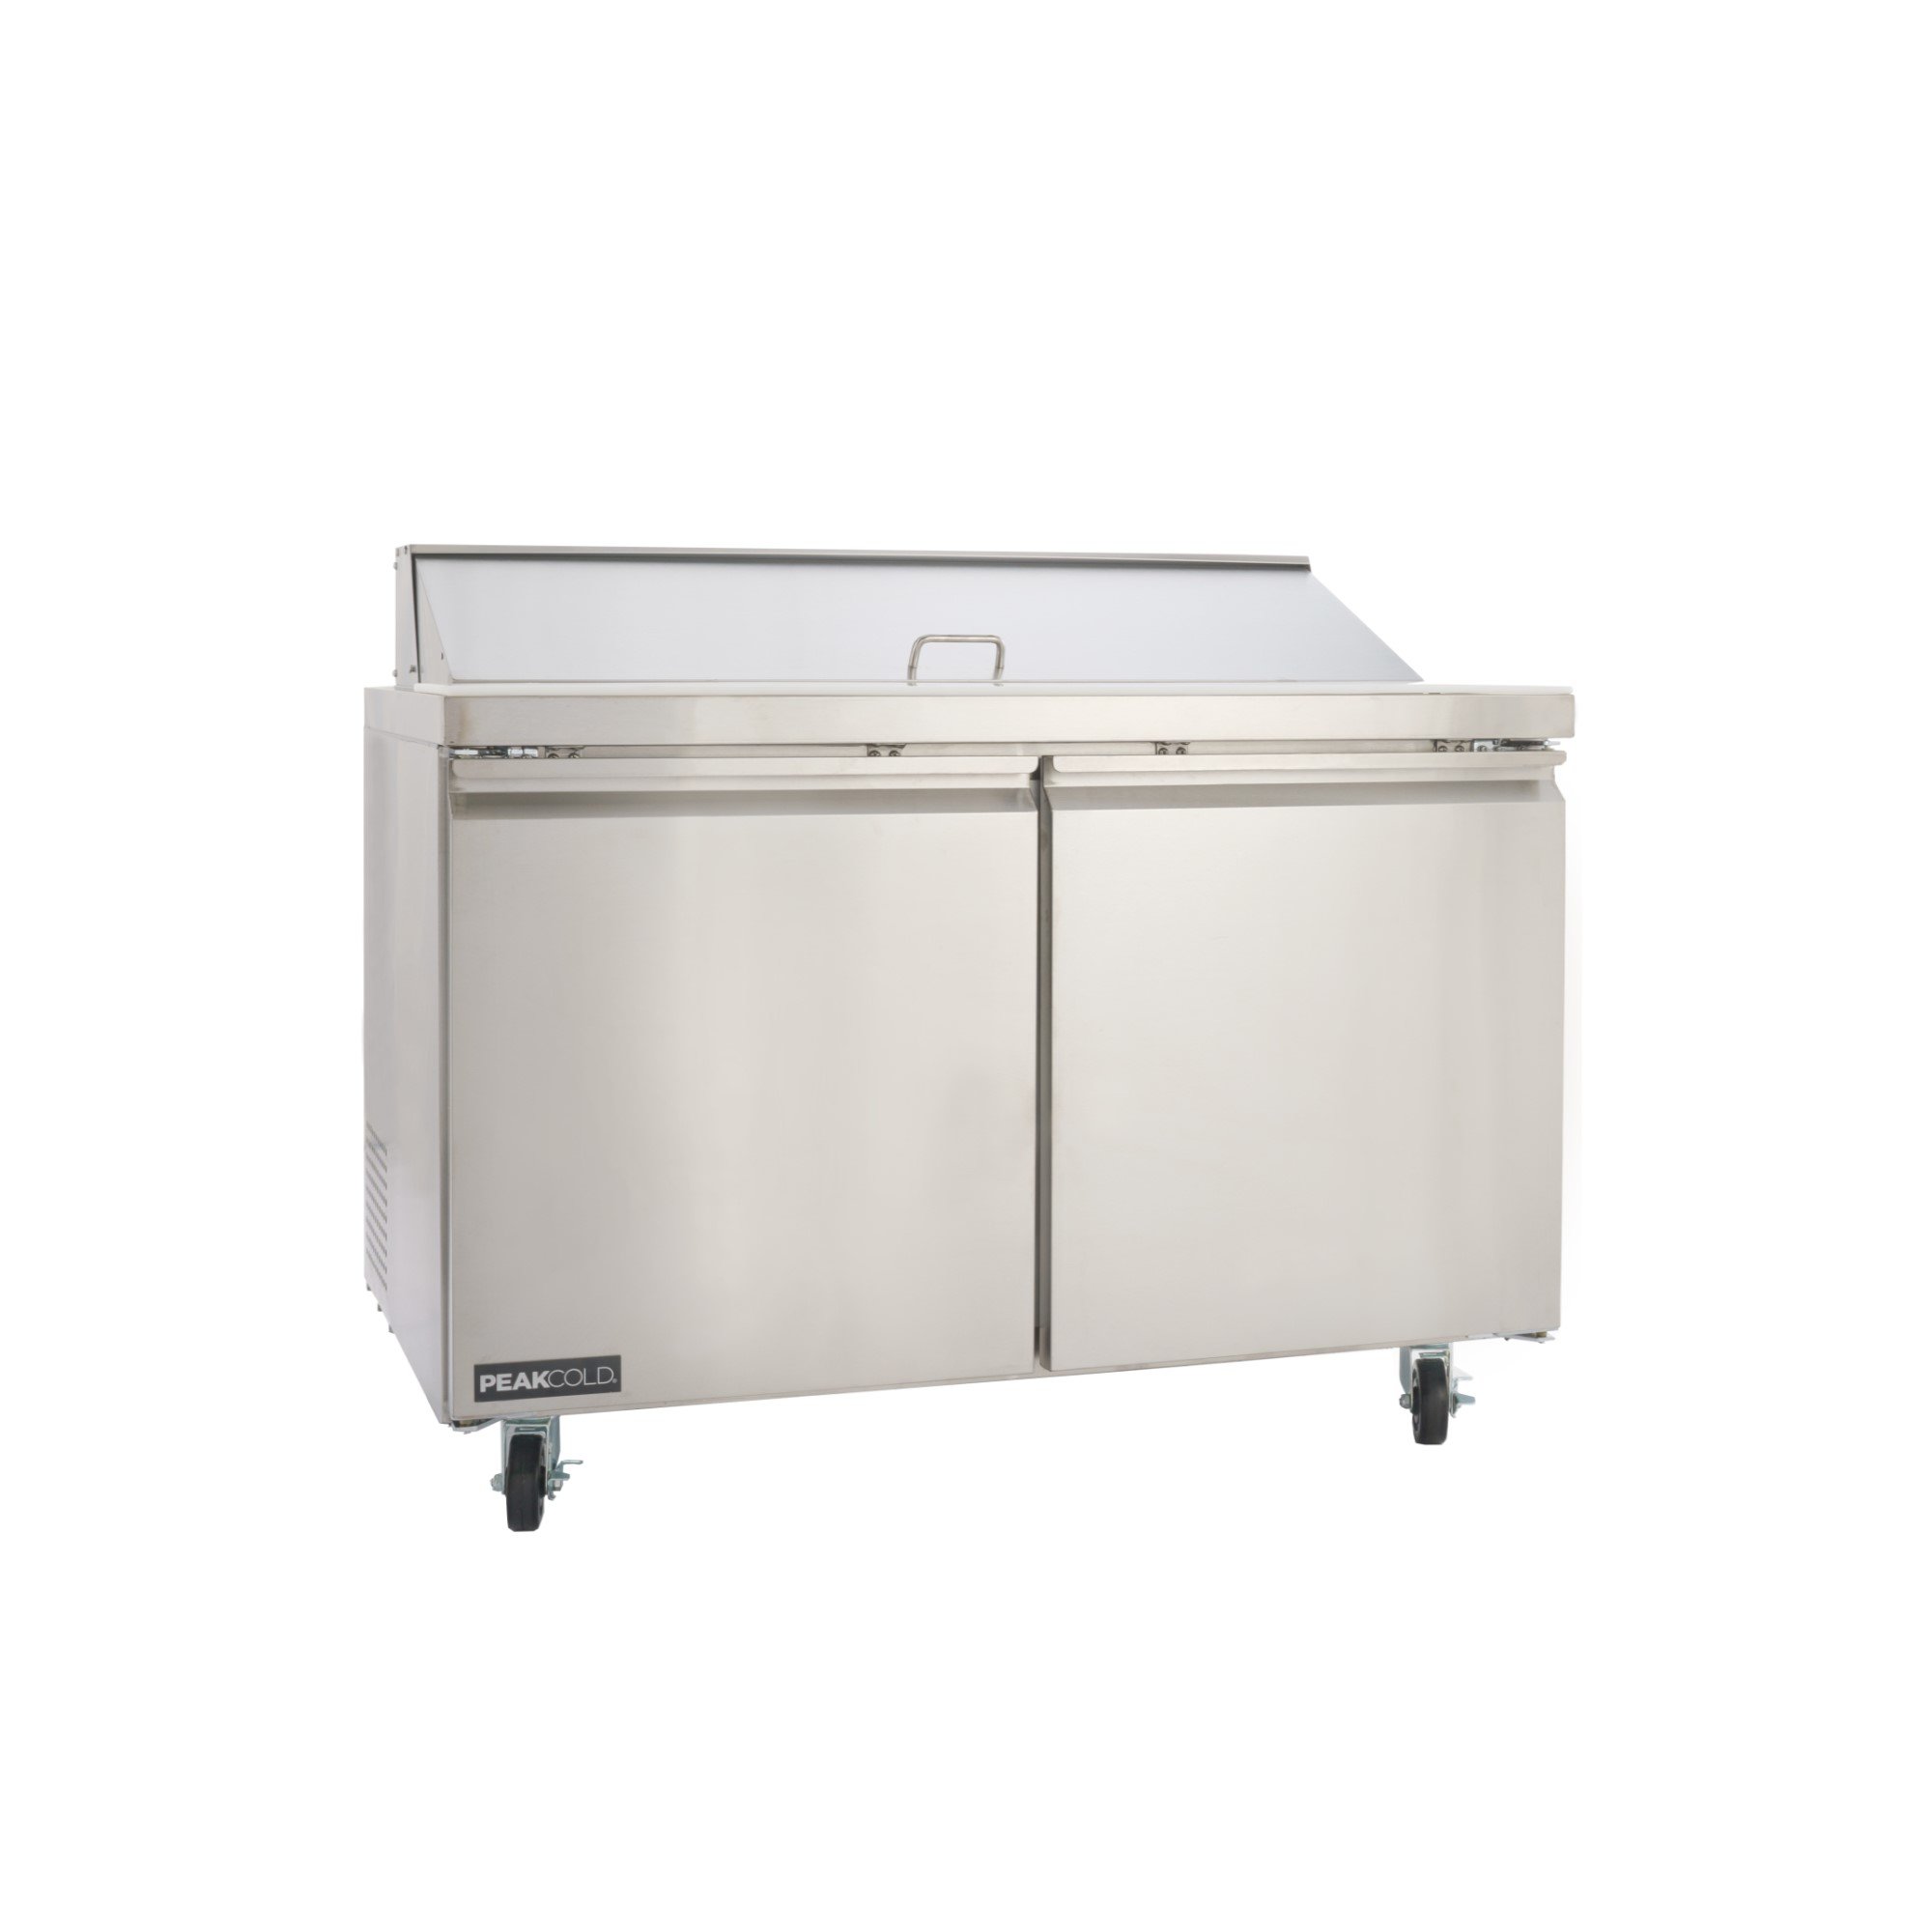 PeakCold Stainless Steel Refrigerated Prep Table - 60"